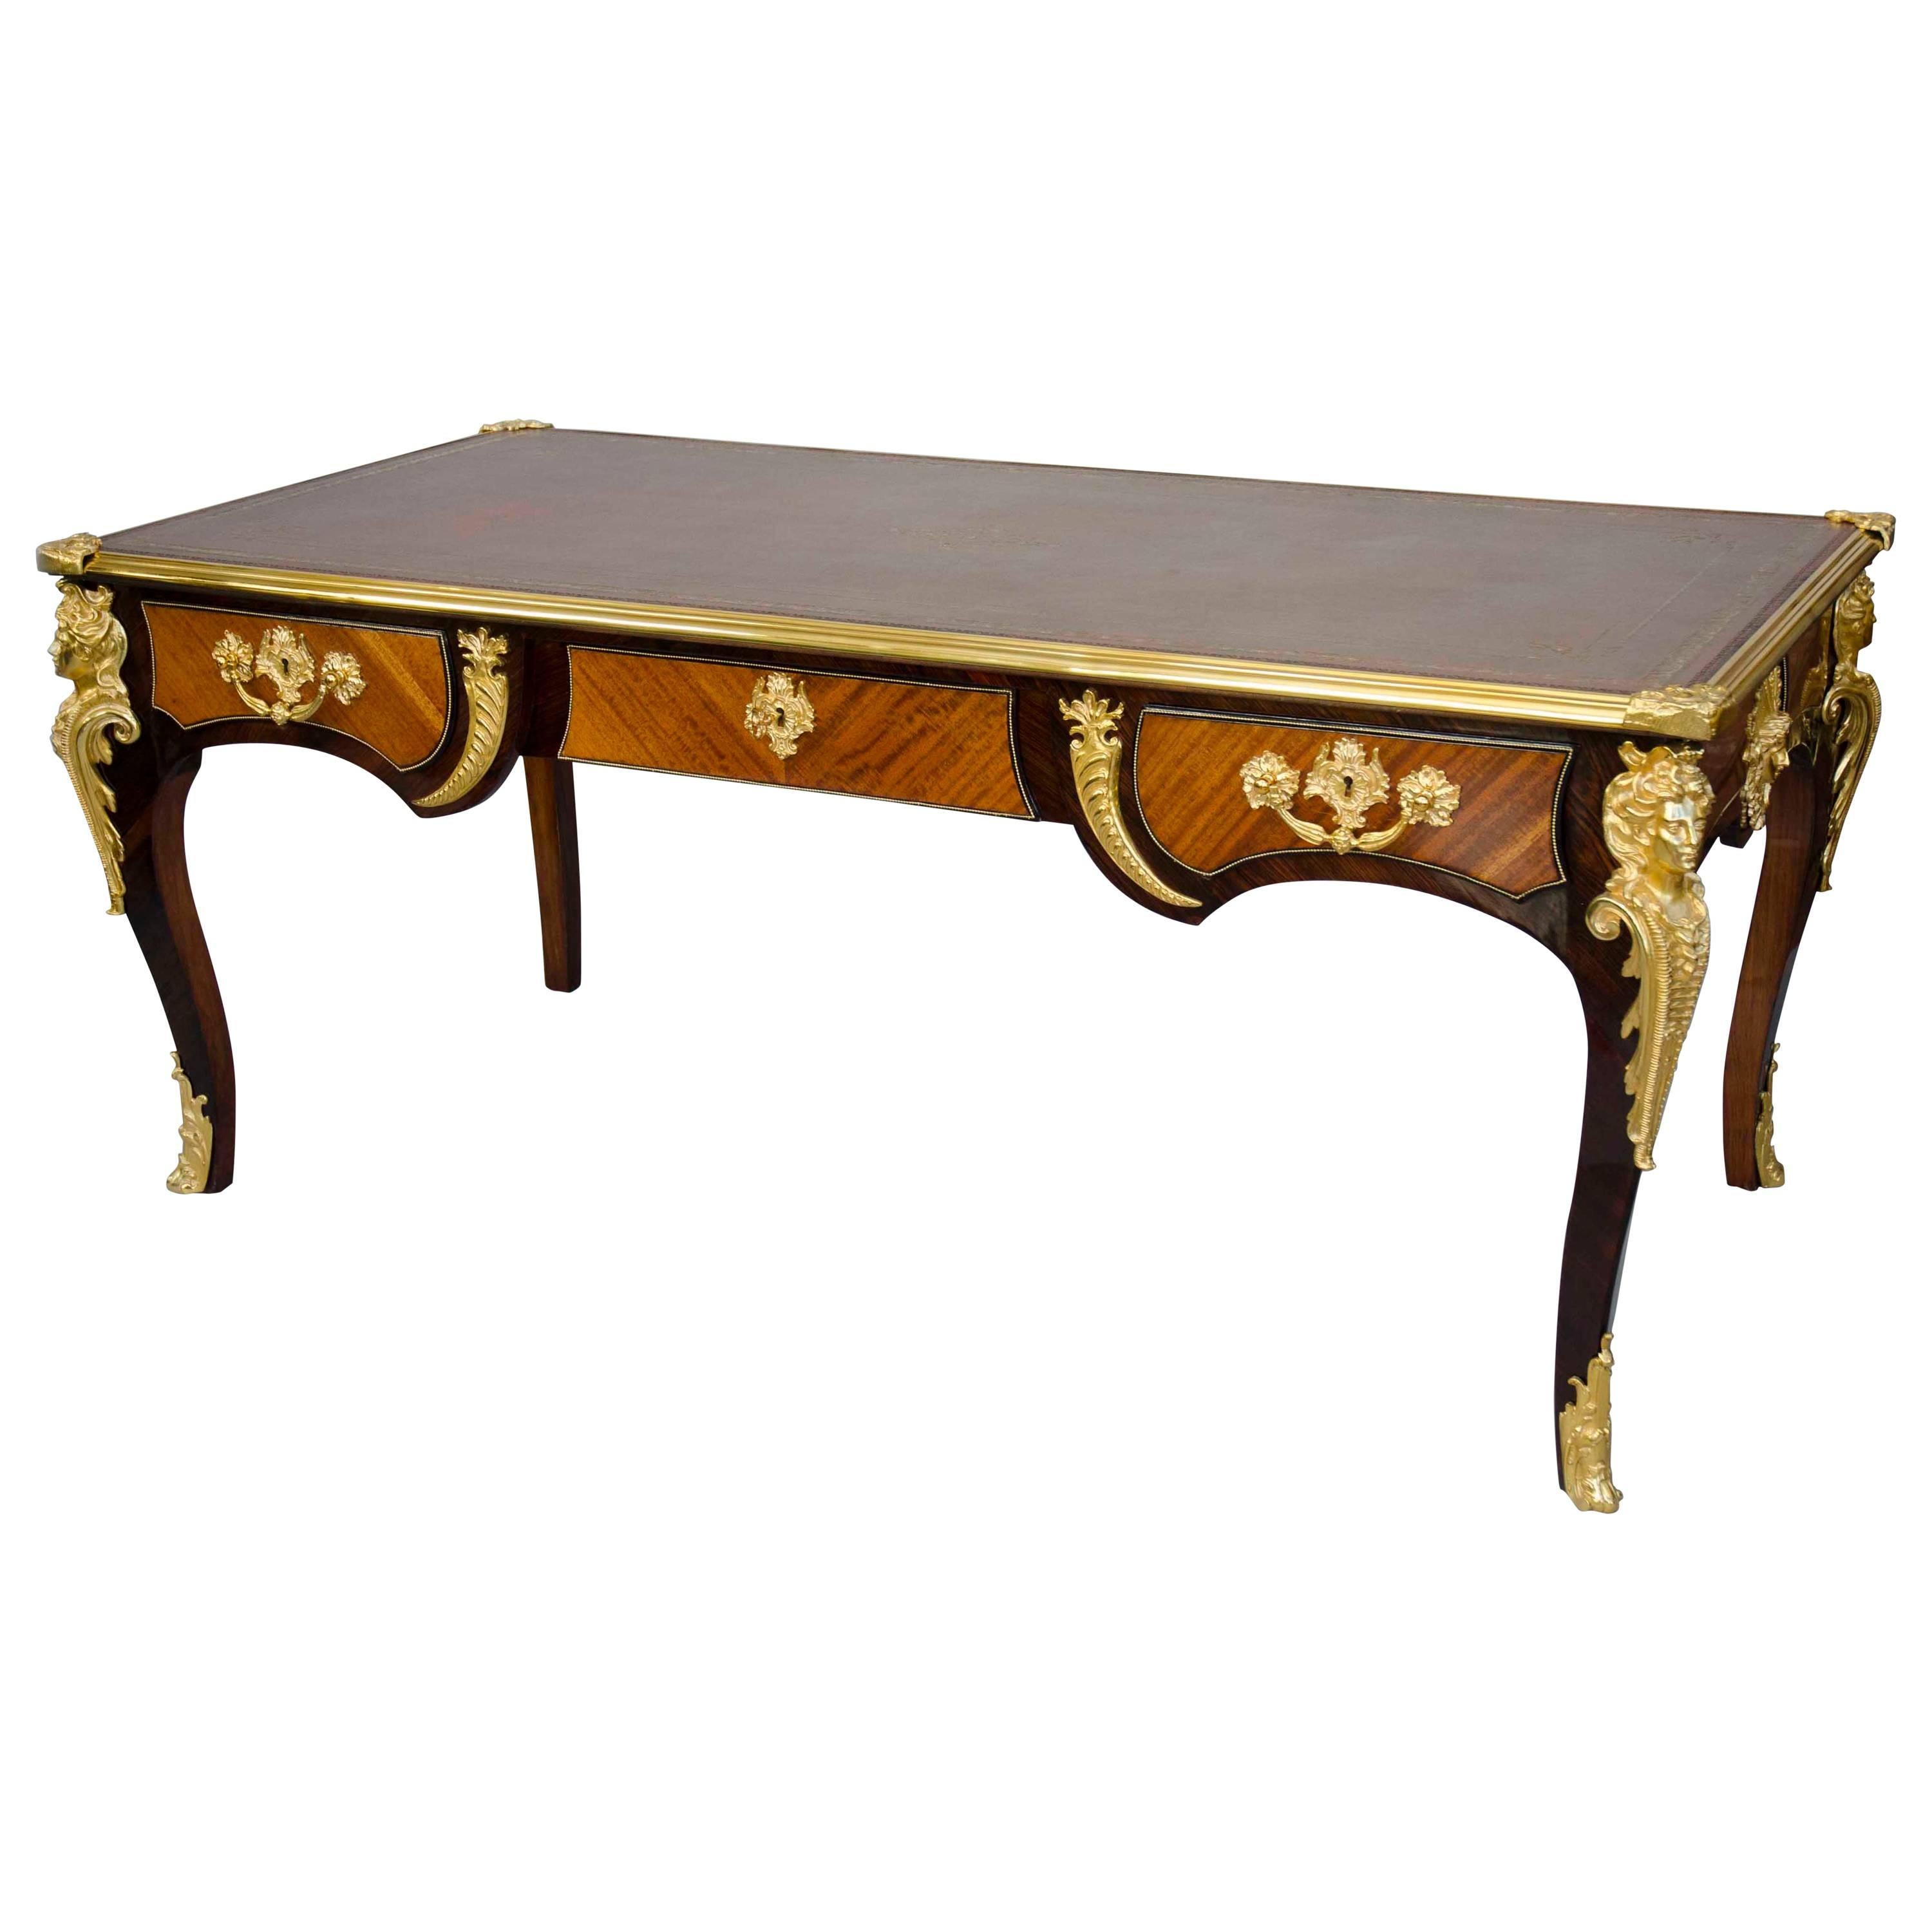 19th Century French Regency Style Rose and Kingwood Office Desk, after Cressent